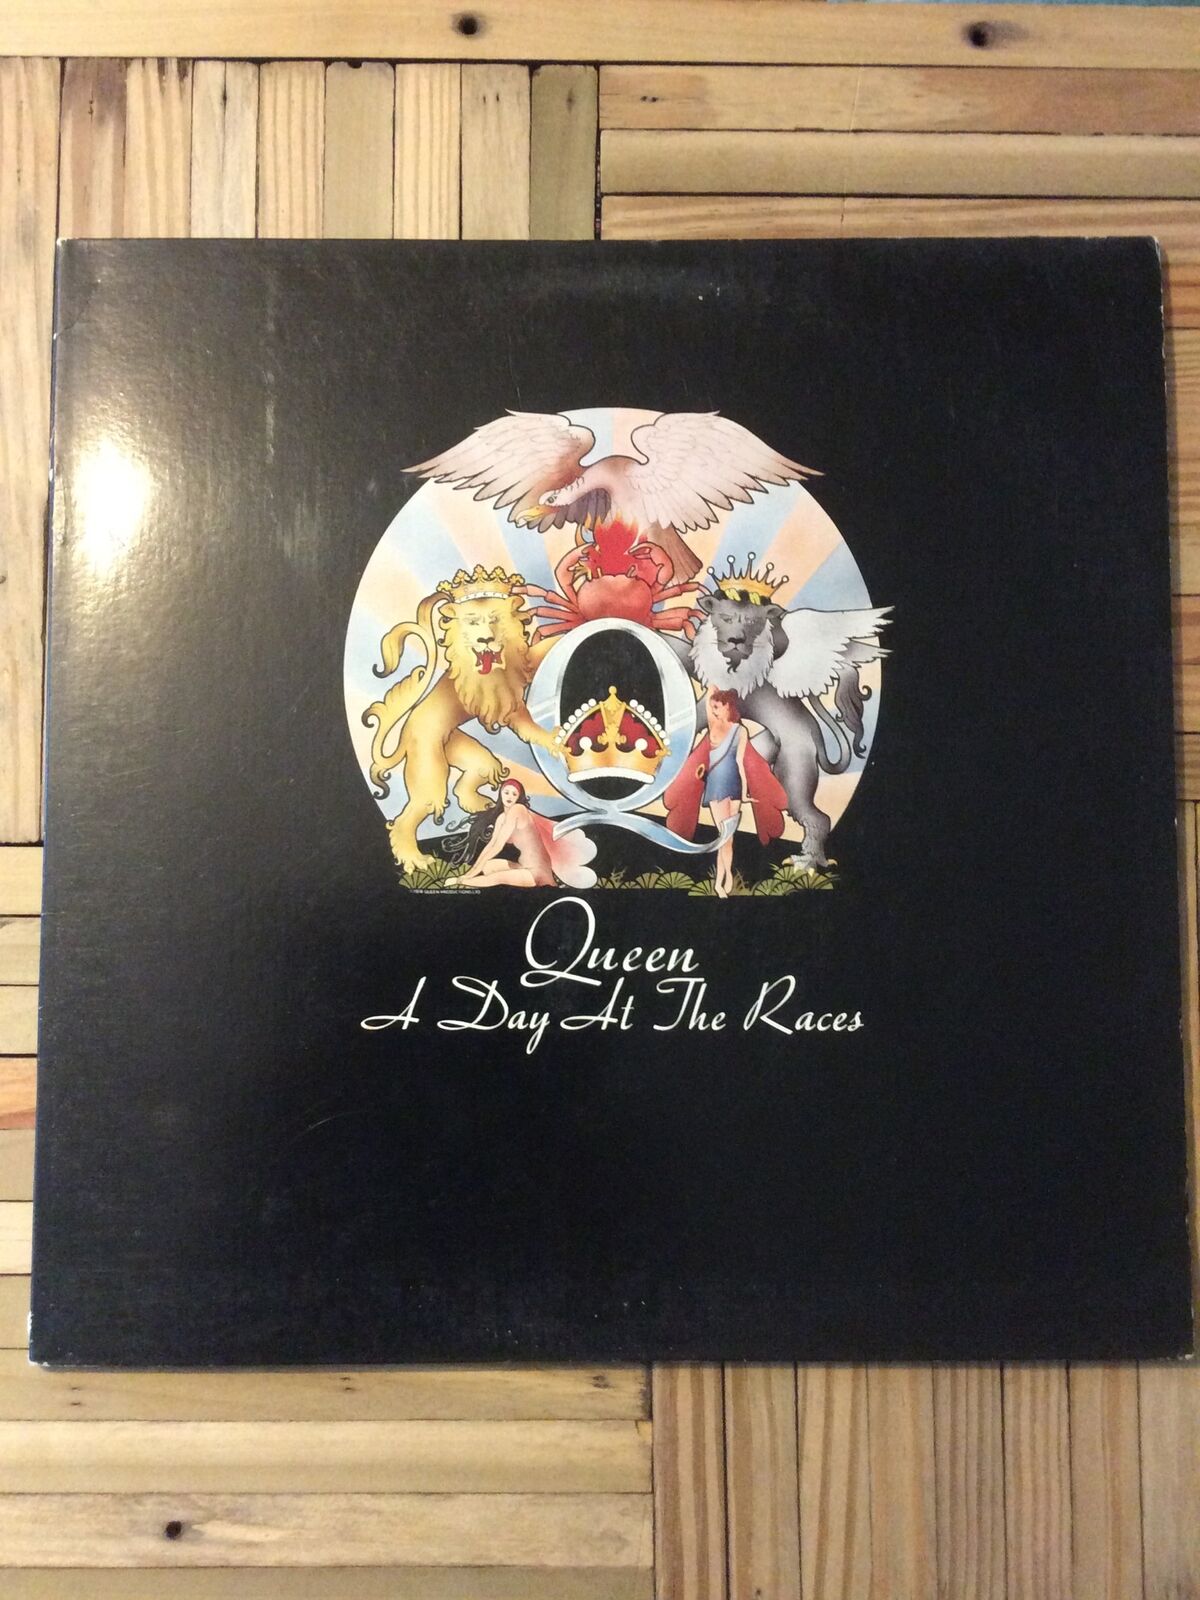 Queen A Day At The Races LP